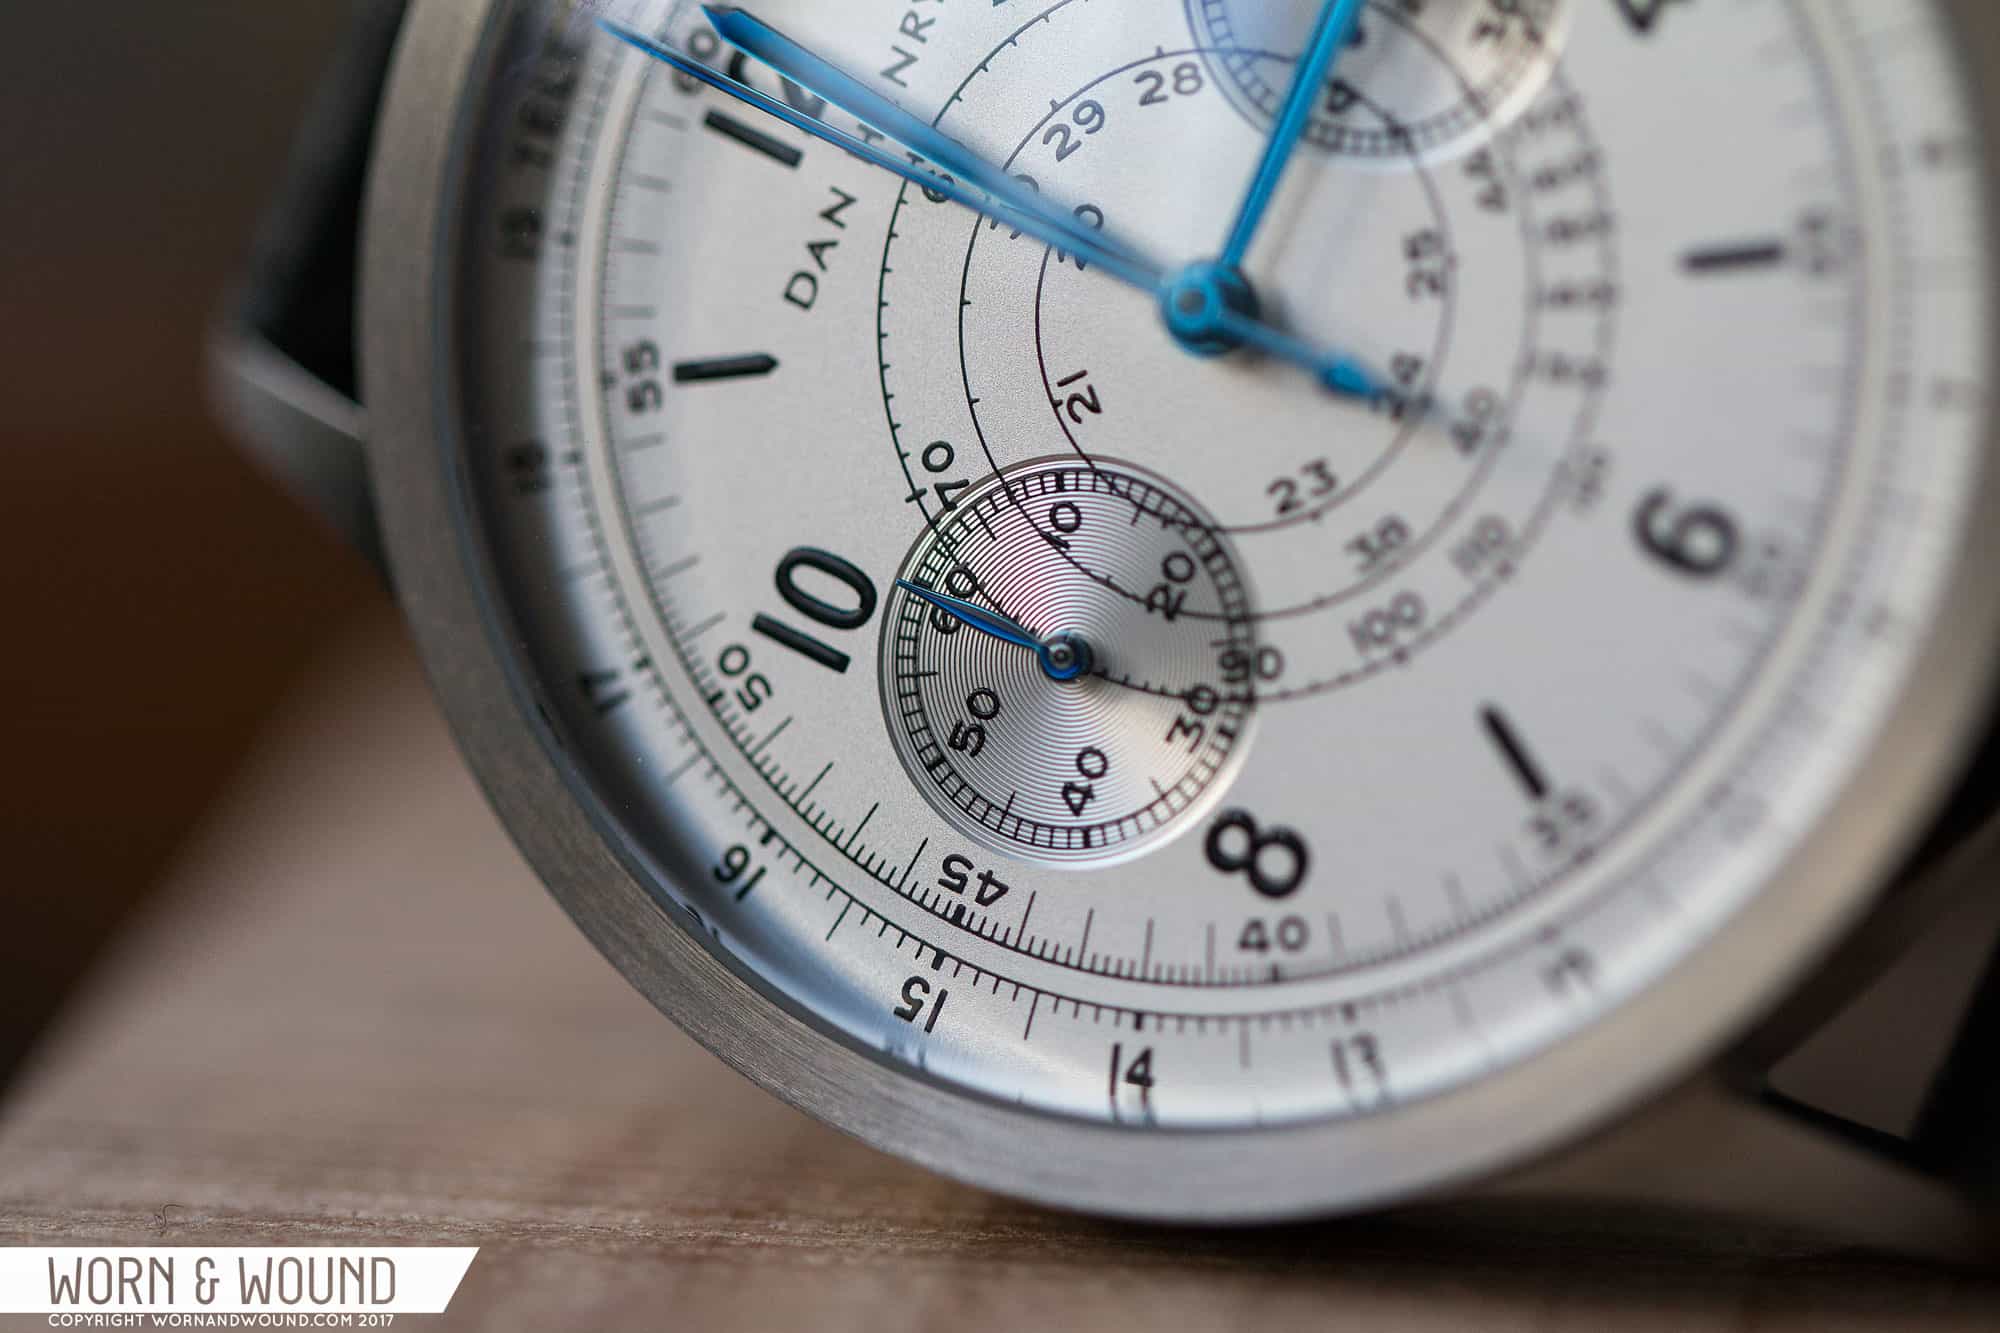 Dan Henry 1939 Chronograph Video Review - Worn & Wound